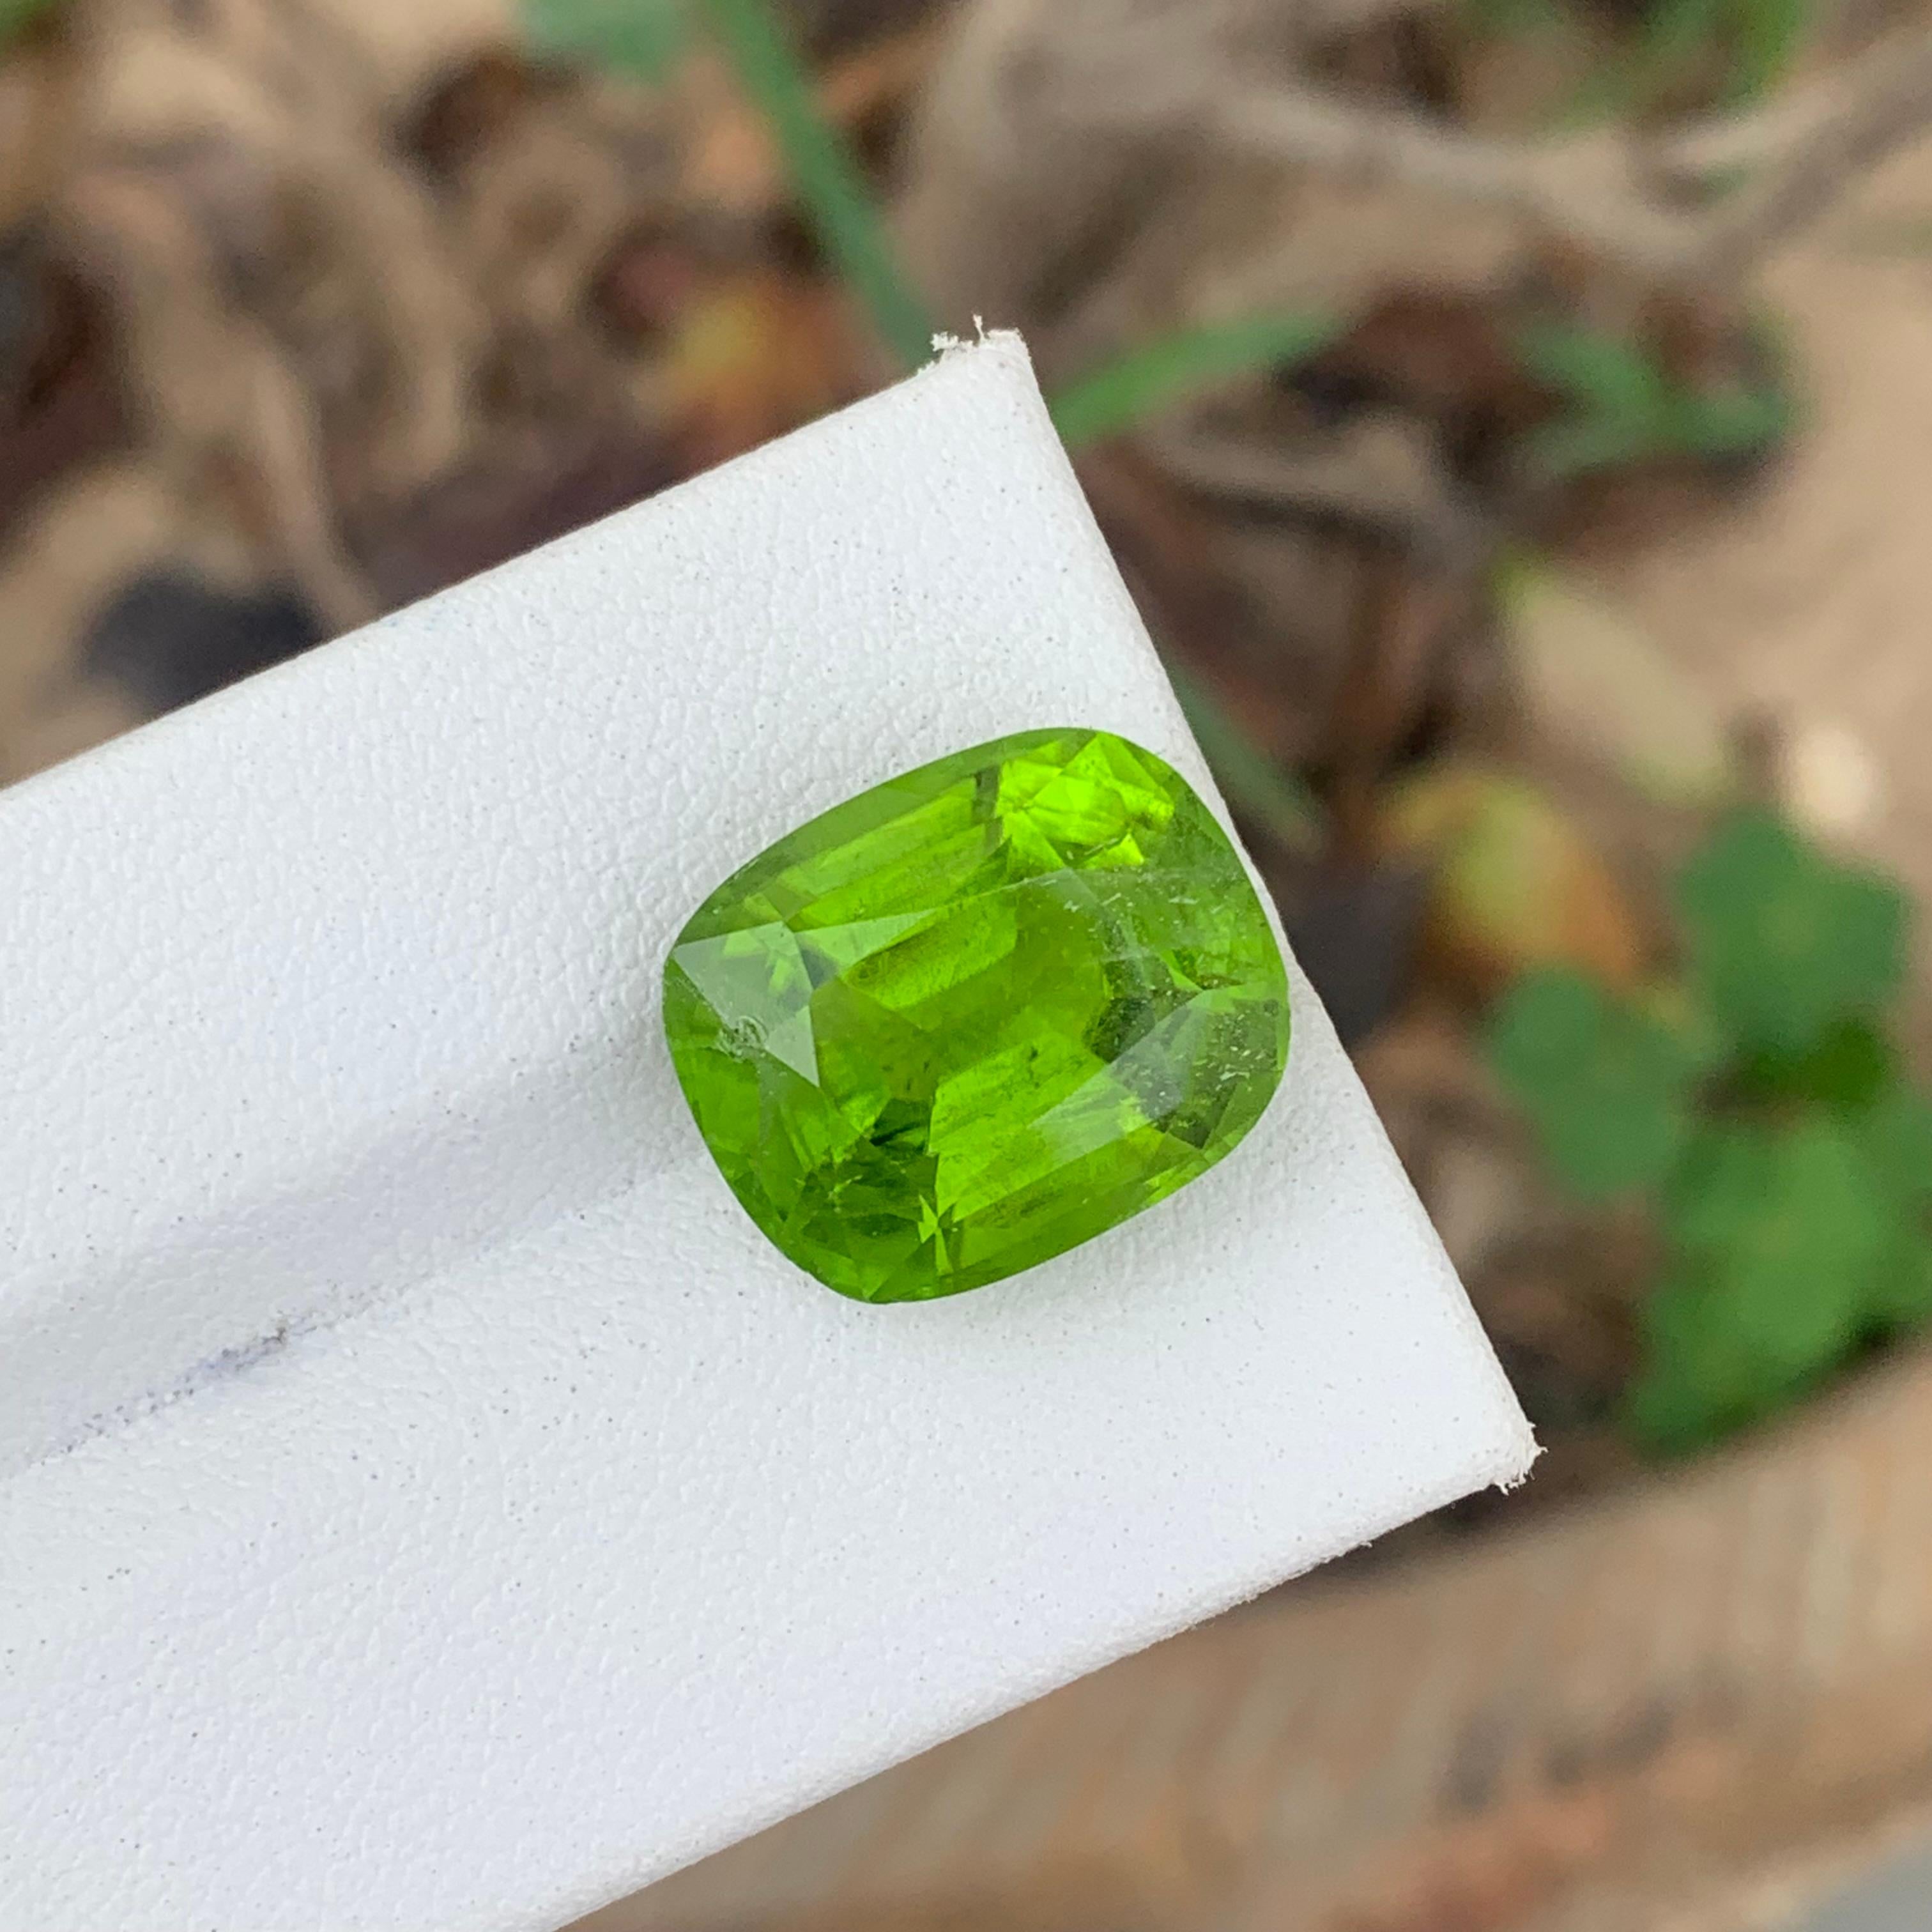 Arts and Crafts 12.75 Carat Natural Cushion Cut Faceted Apple Green Peridot From Pakistan Mine For Sale